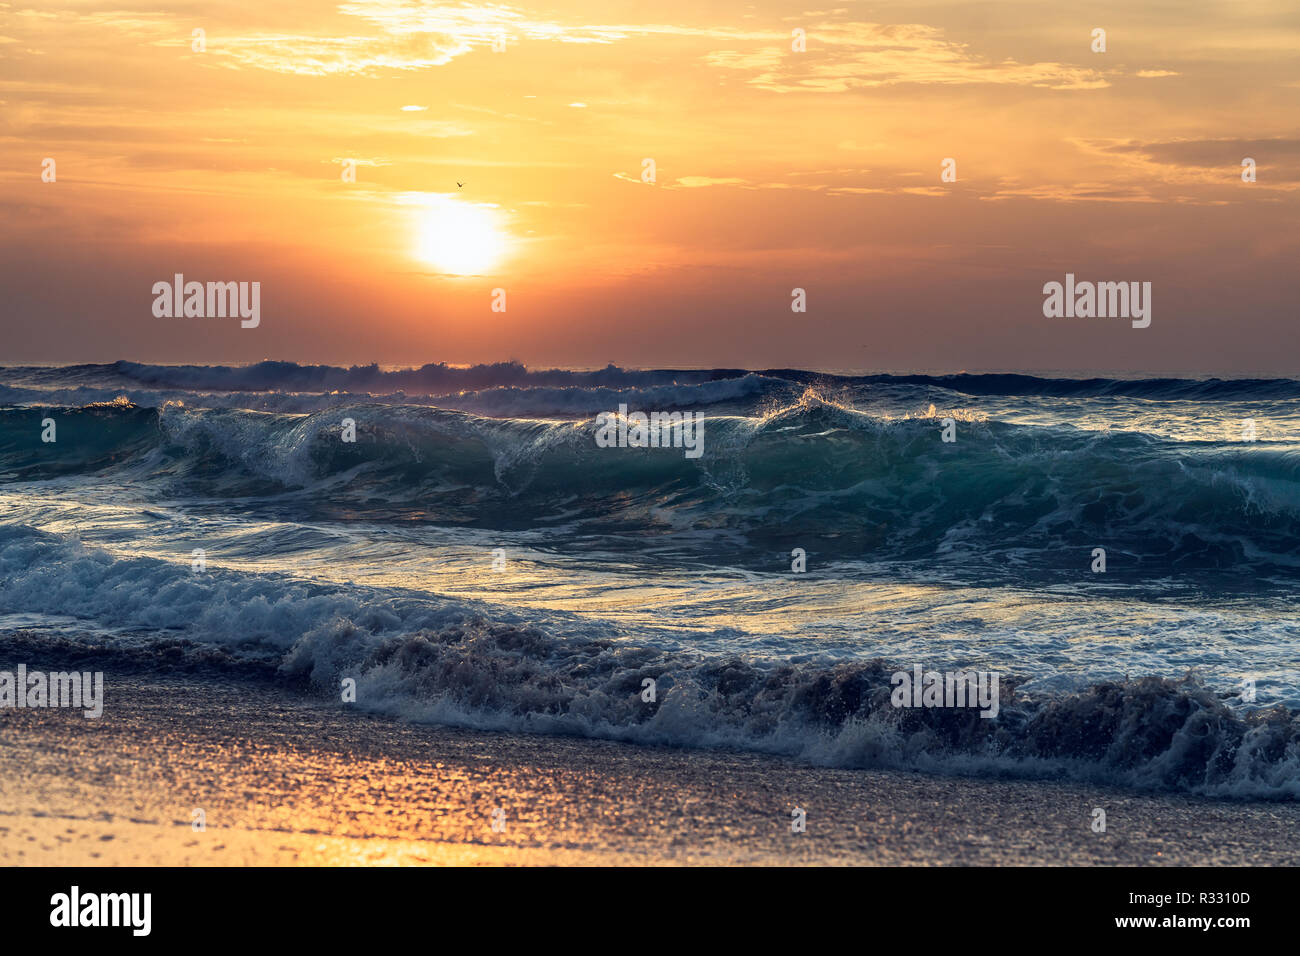 Beautiful sunset over the sea with big waves and cloudy sky, California coastline Stock Photo